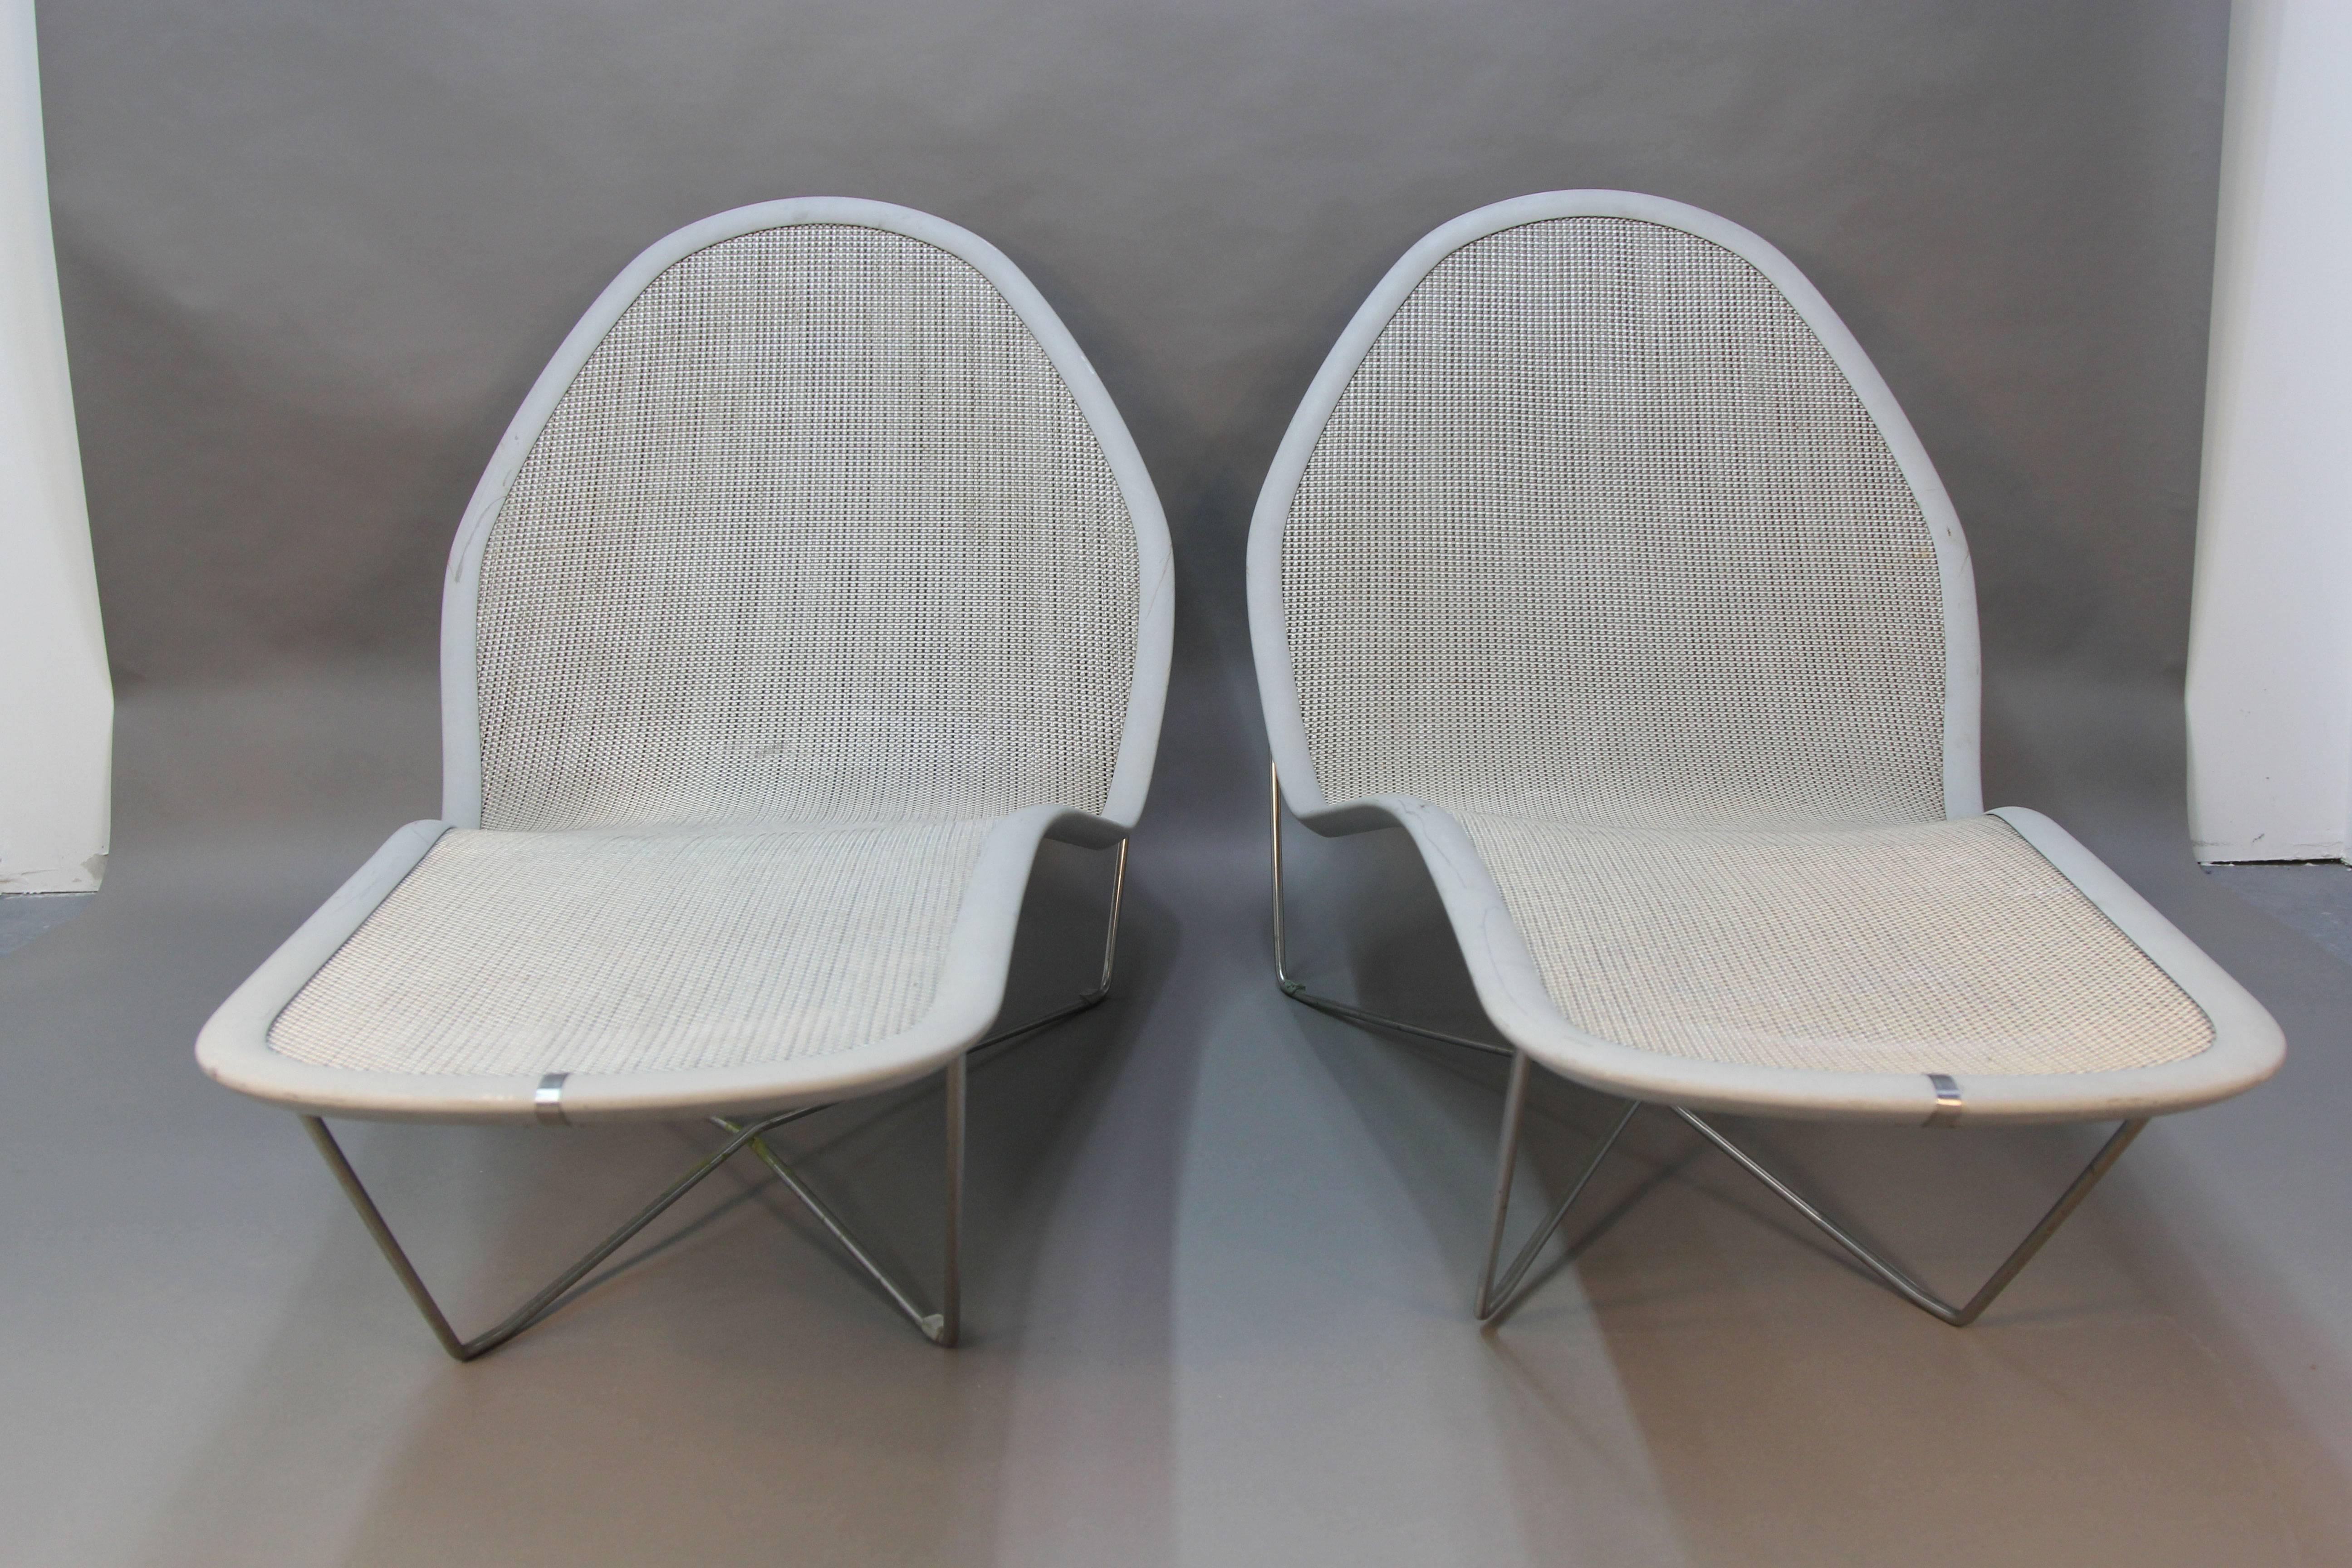 Amazing pair of mesh modern lounge chairs on steel X-base frame. The Loom chairs are designed by Ross Lovegrove and manufactured by Loom.

The British industrial designer Ross Lovegrove (born 1958) designed this lounger ‘LOOM TM’ in 2000 for the